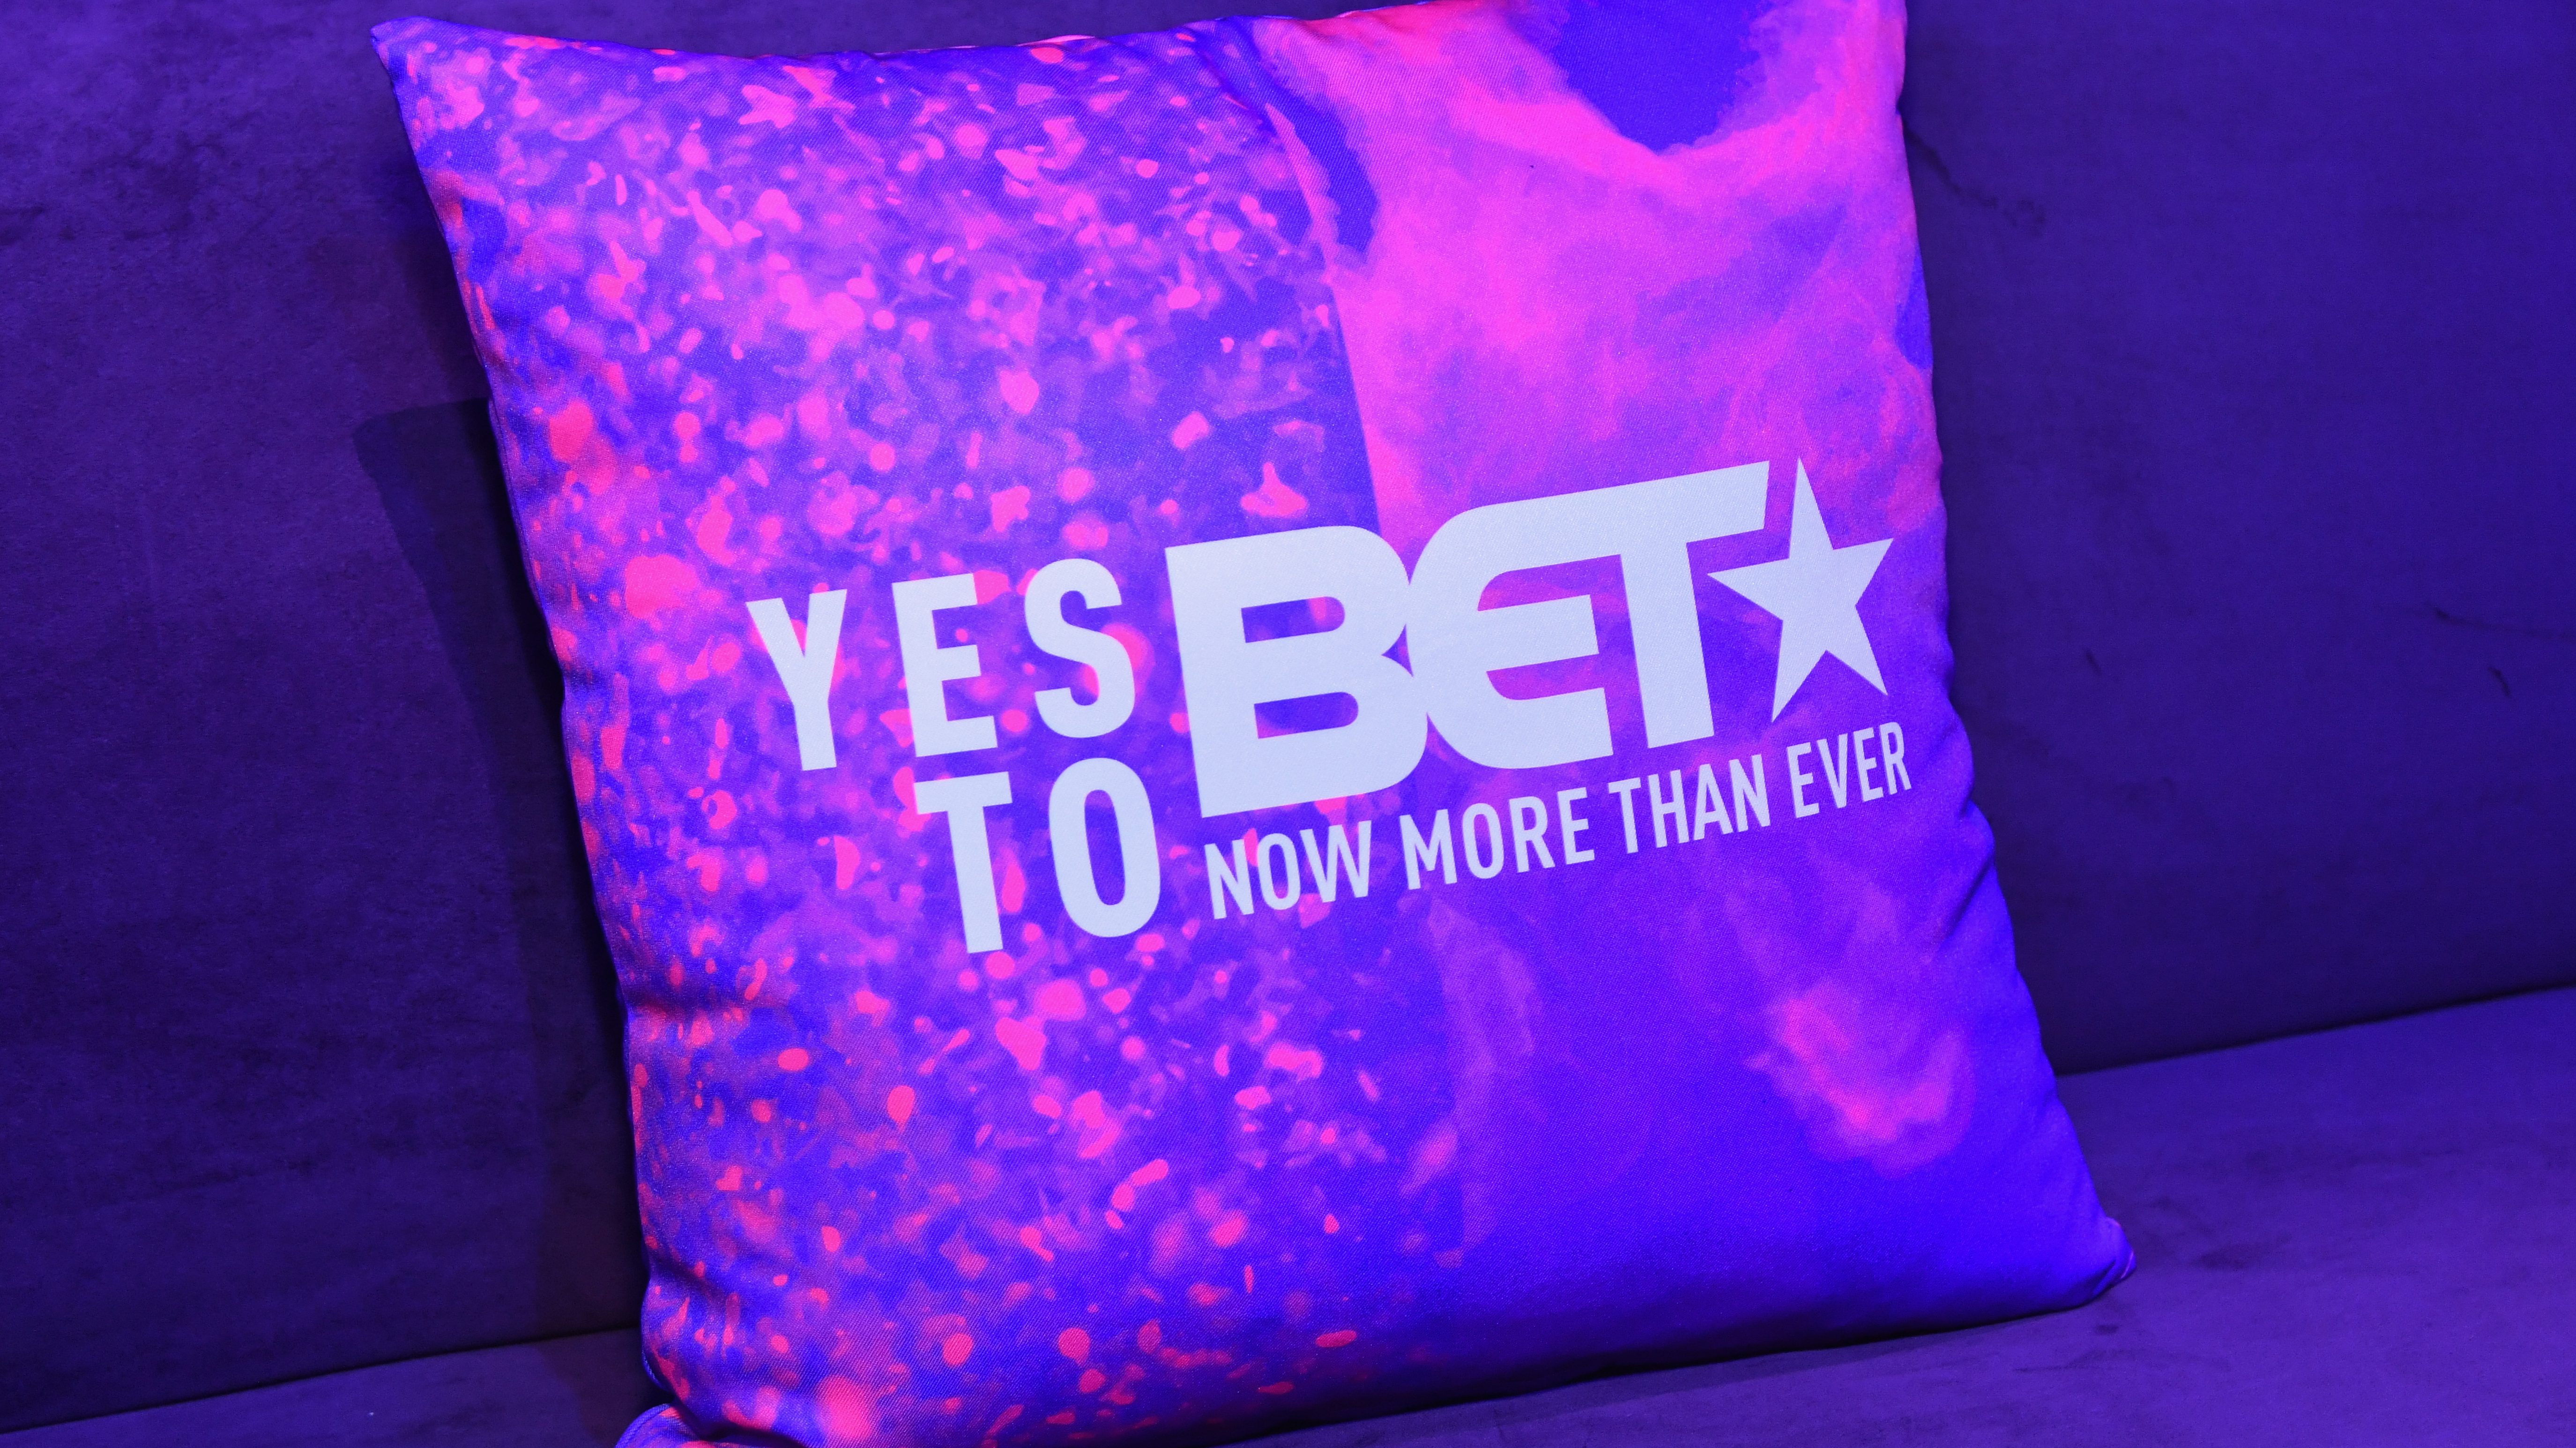 watch bet live online for free